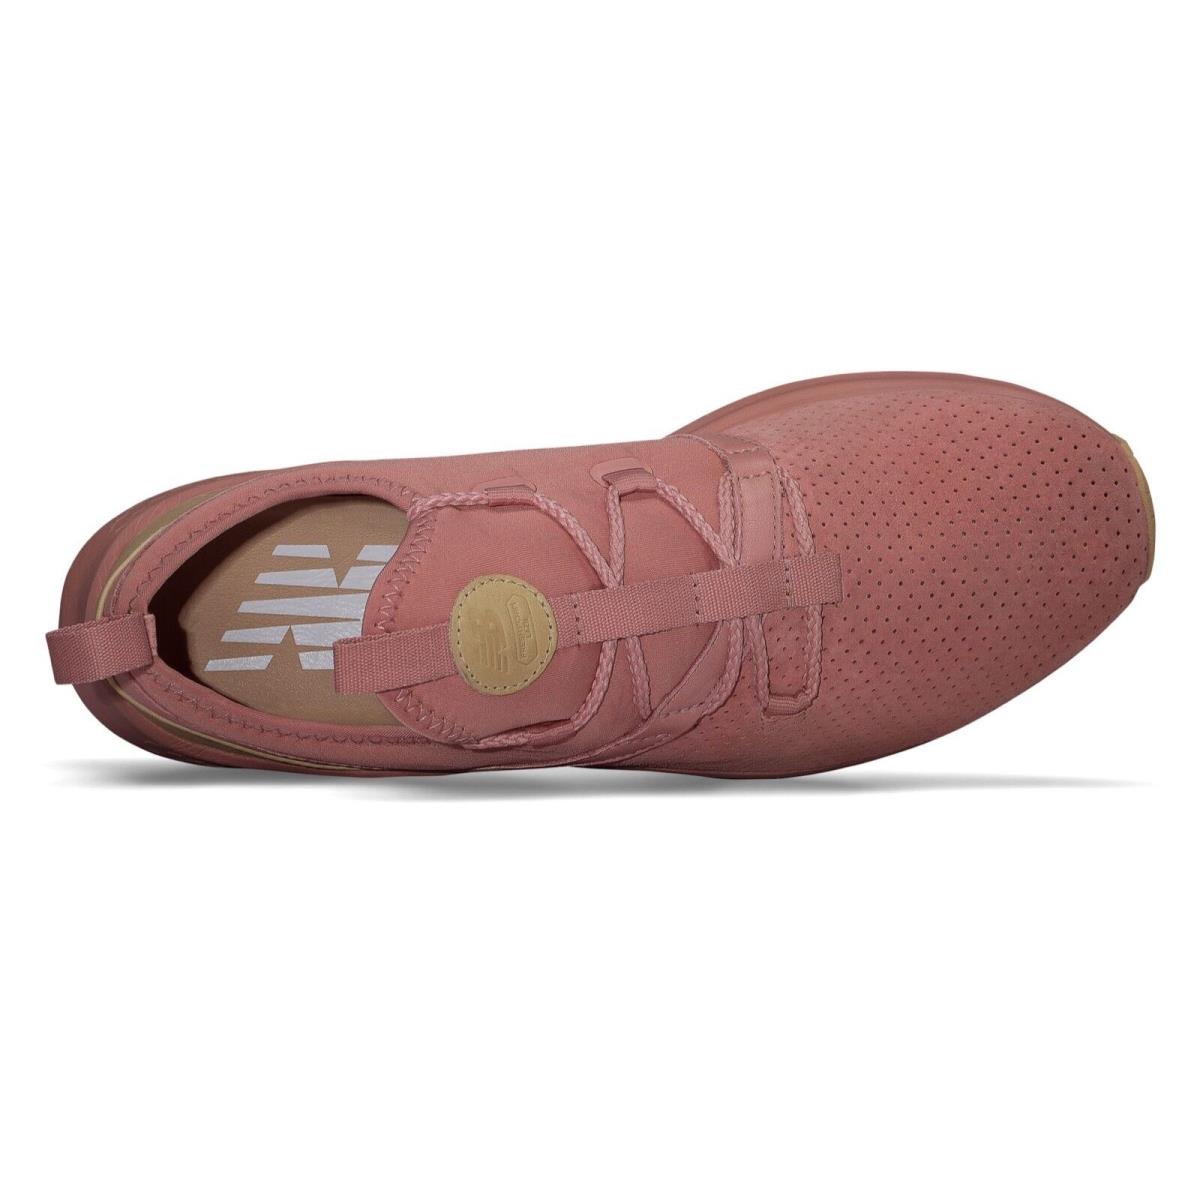 New Balance shoes  - Dusted Peach with Tan , Dusted Peach with Tan Manufacturer 1